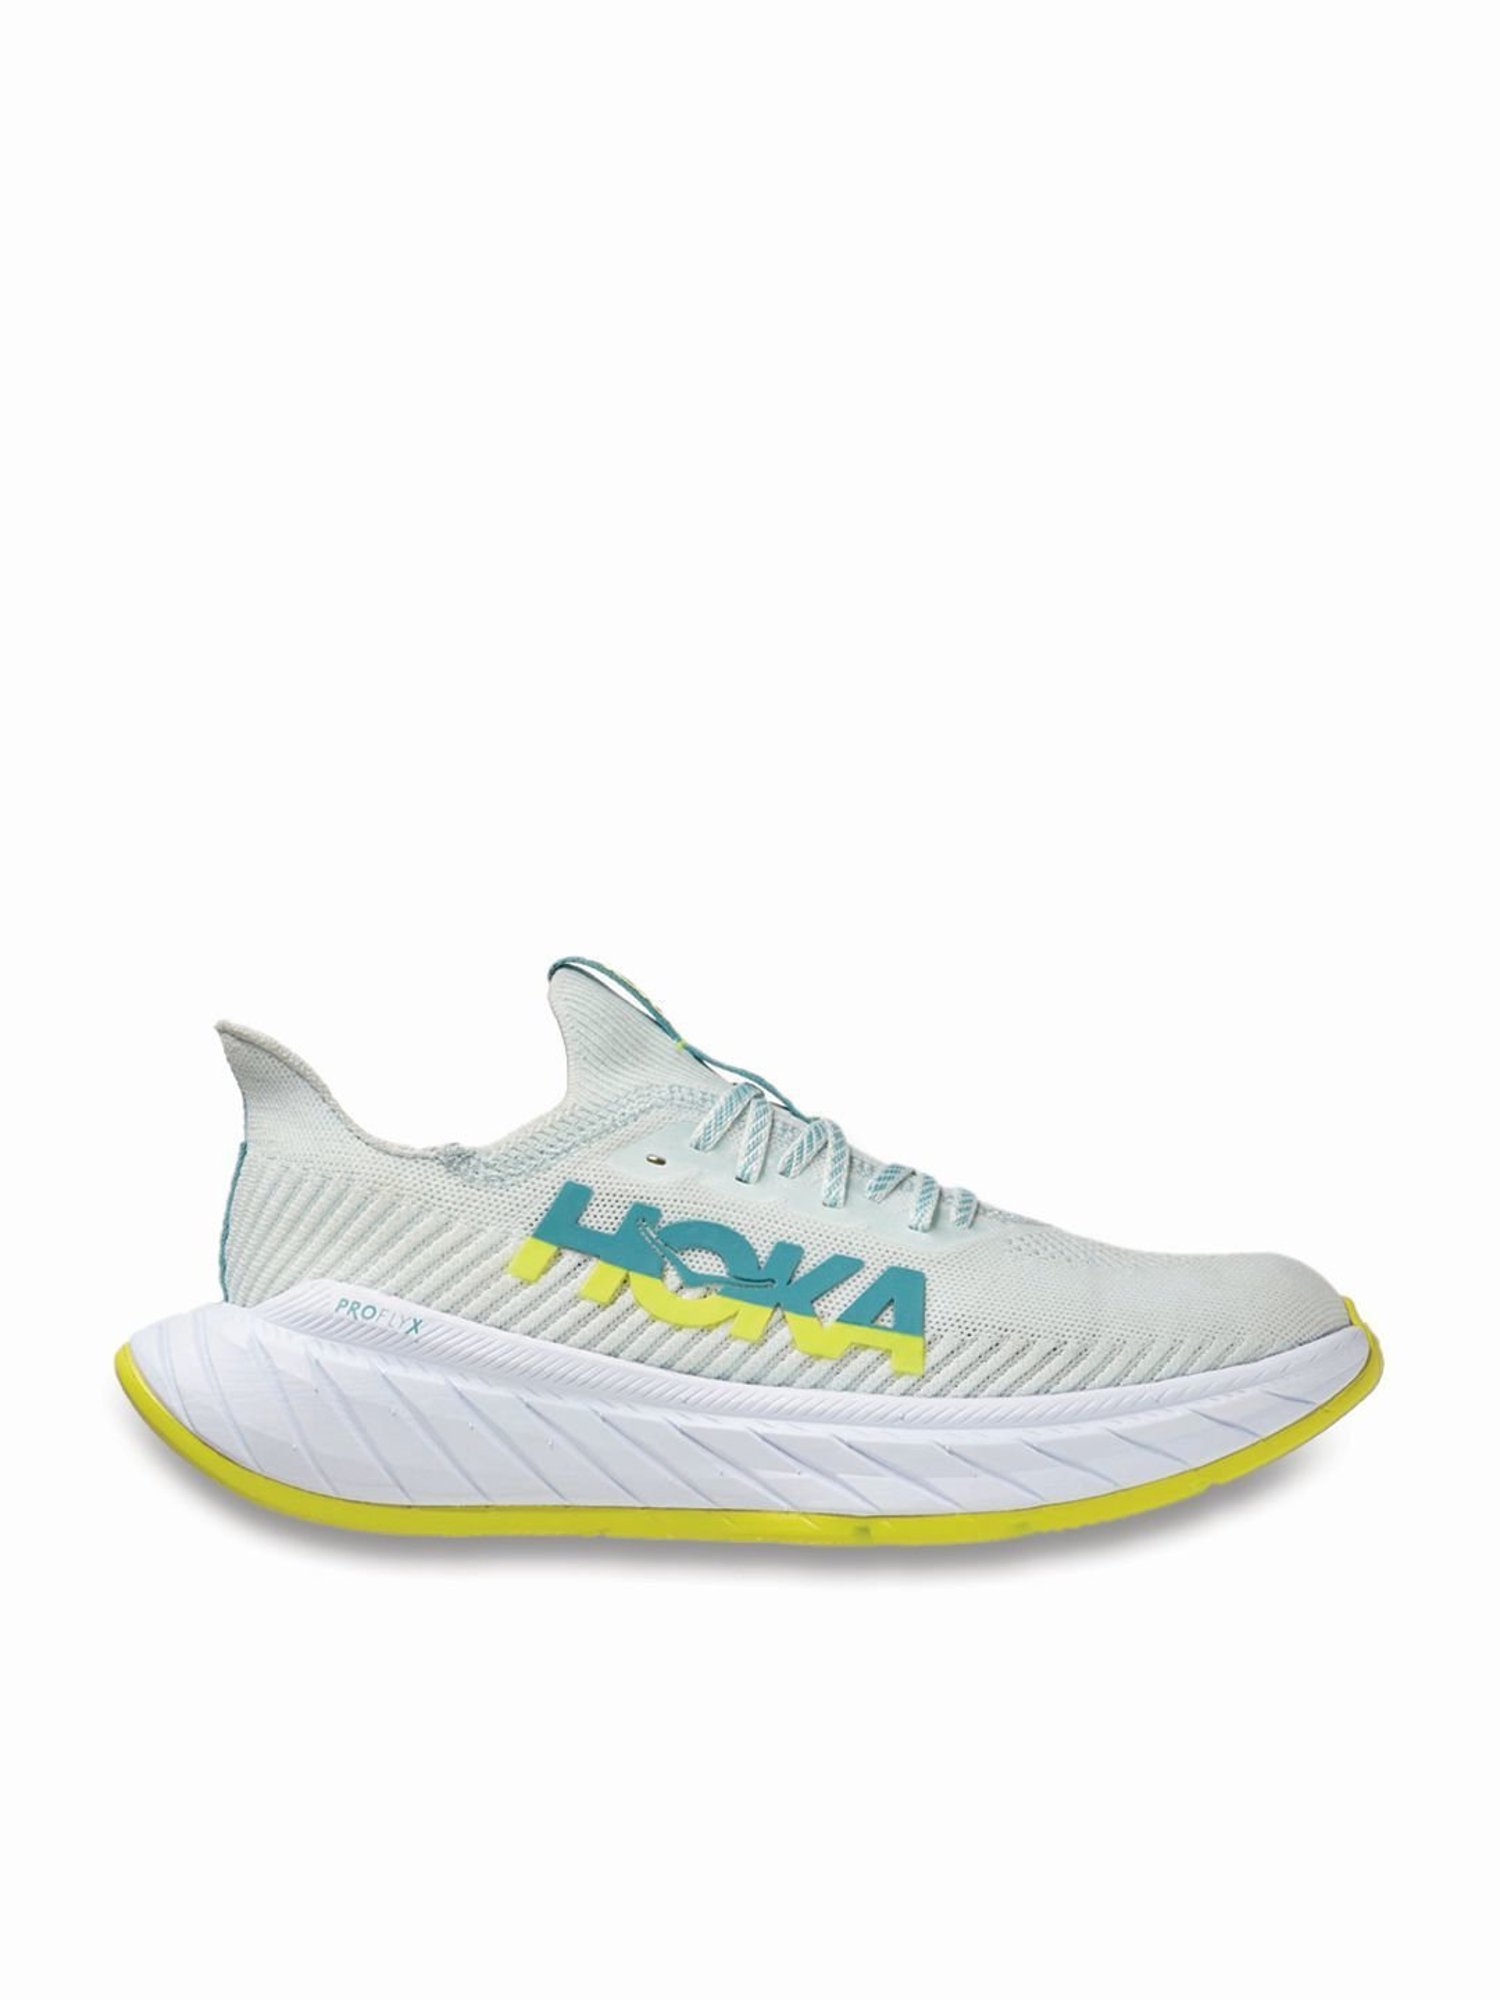 Mens Hoka Carbon X 3 Size 10 Black White New for Sale in Highland